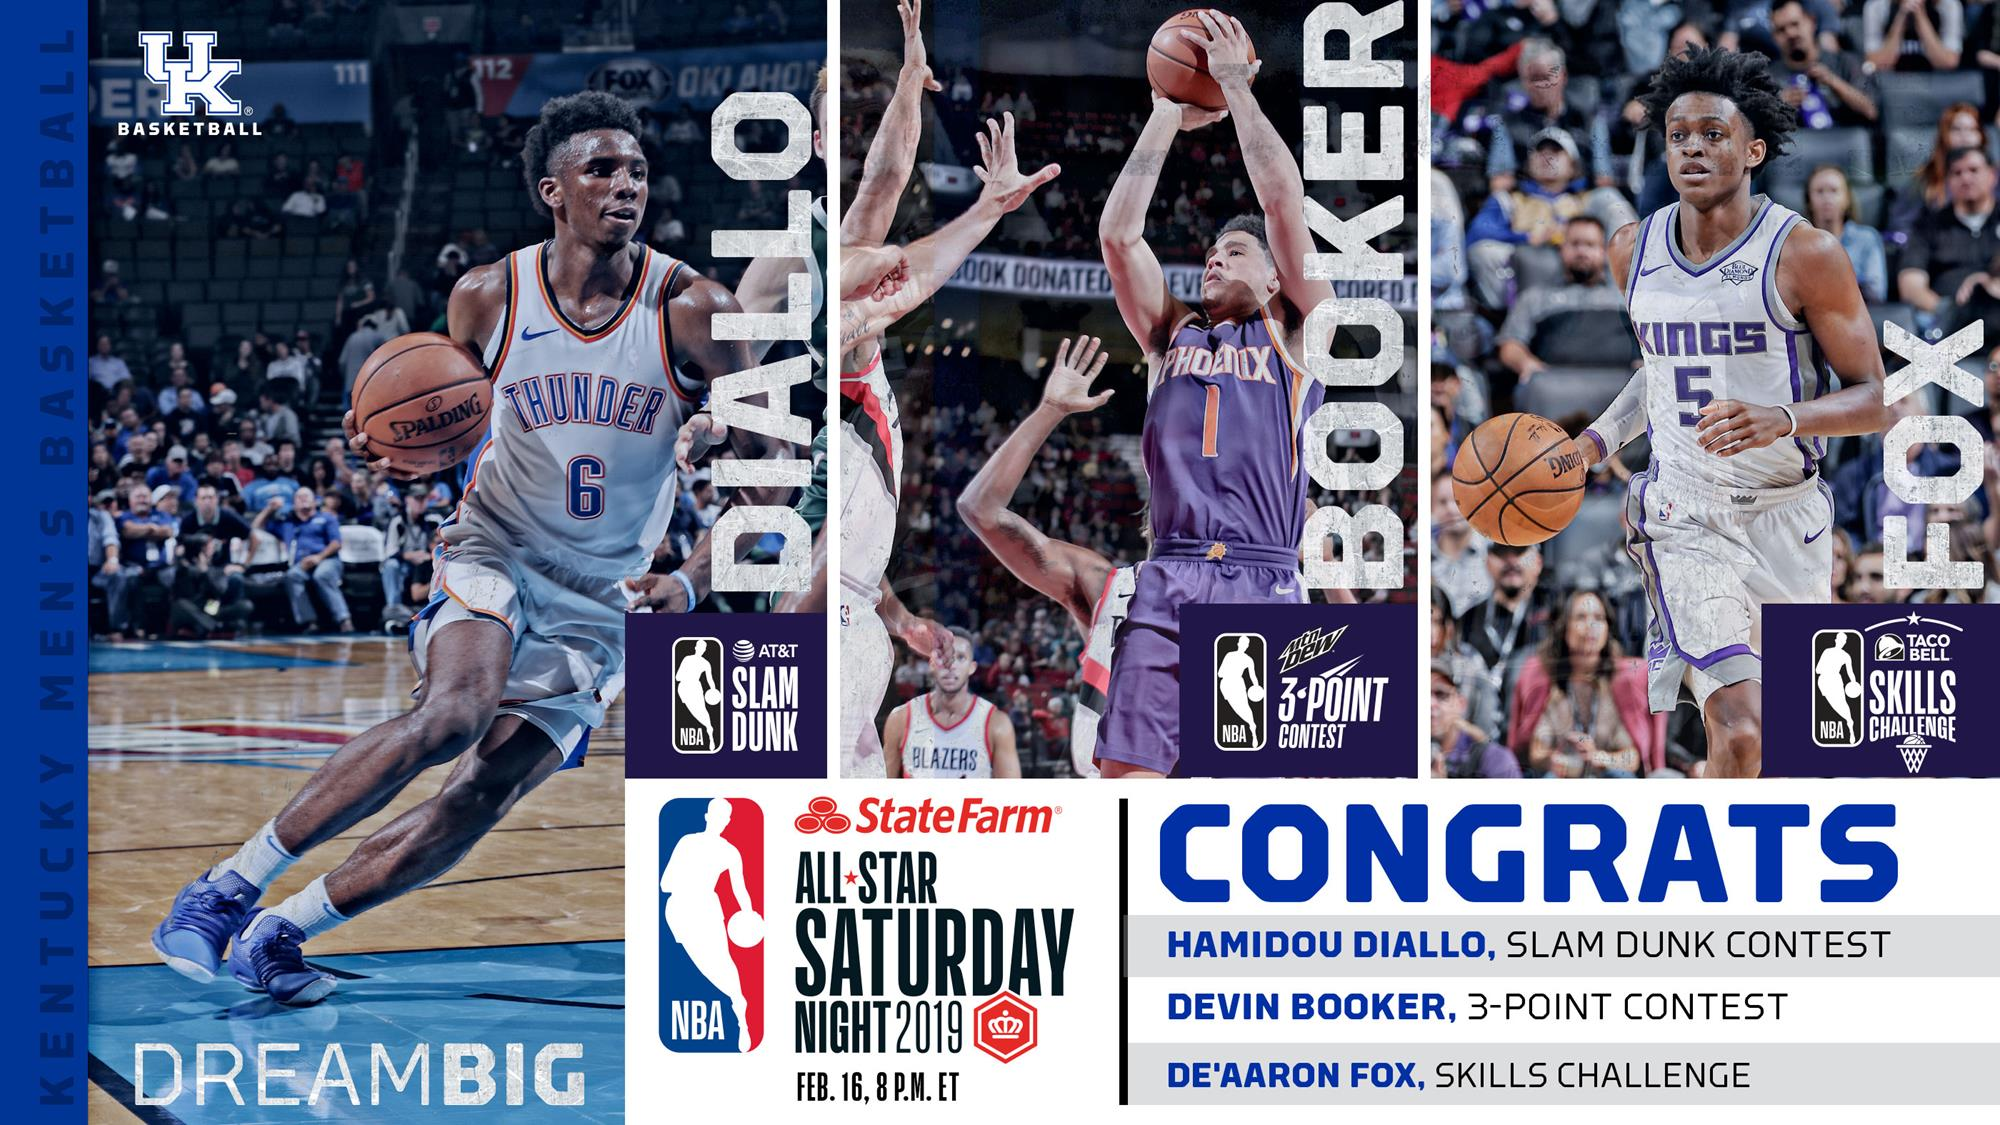 Three Wildcats to be Featured at NBA All-Star Saturday Night